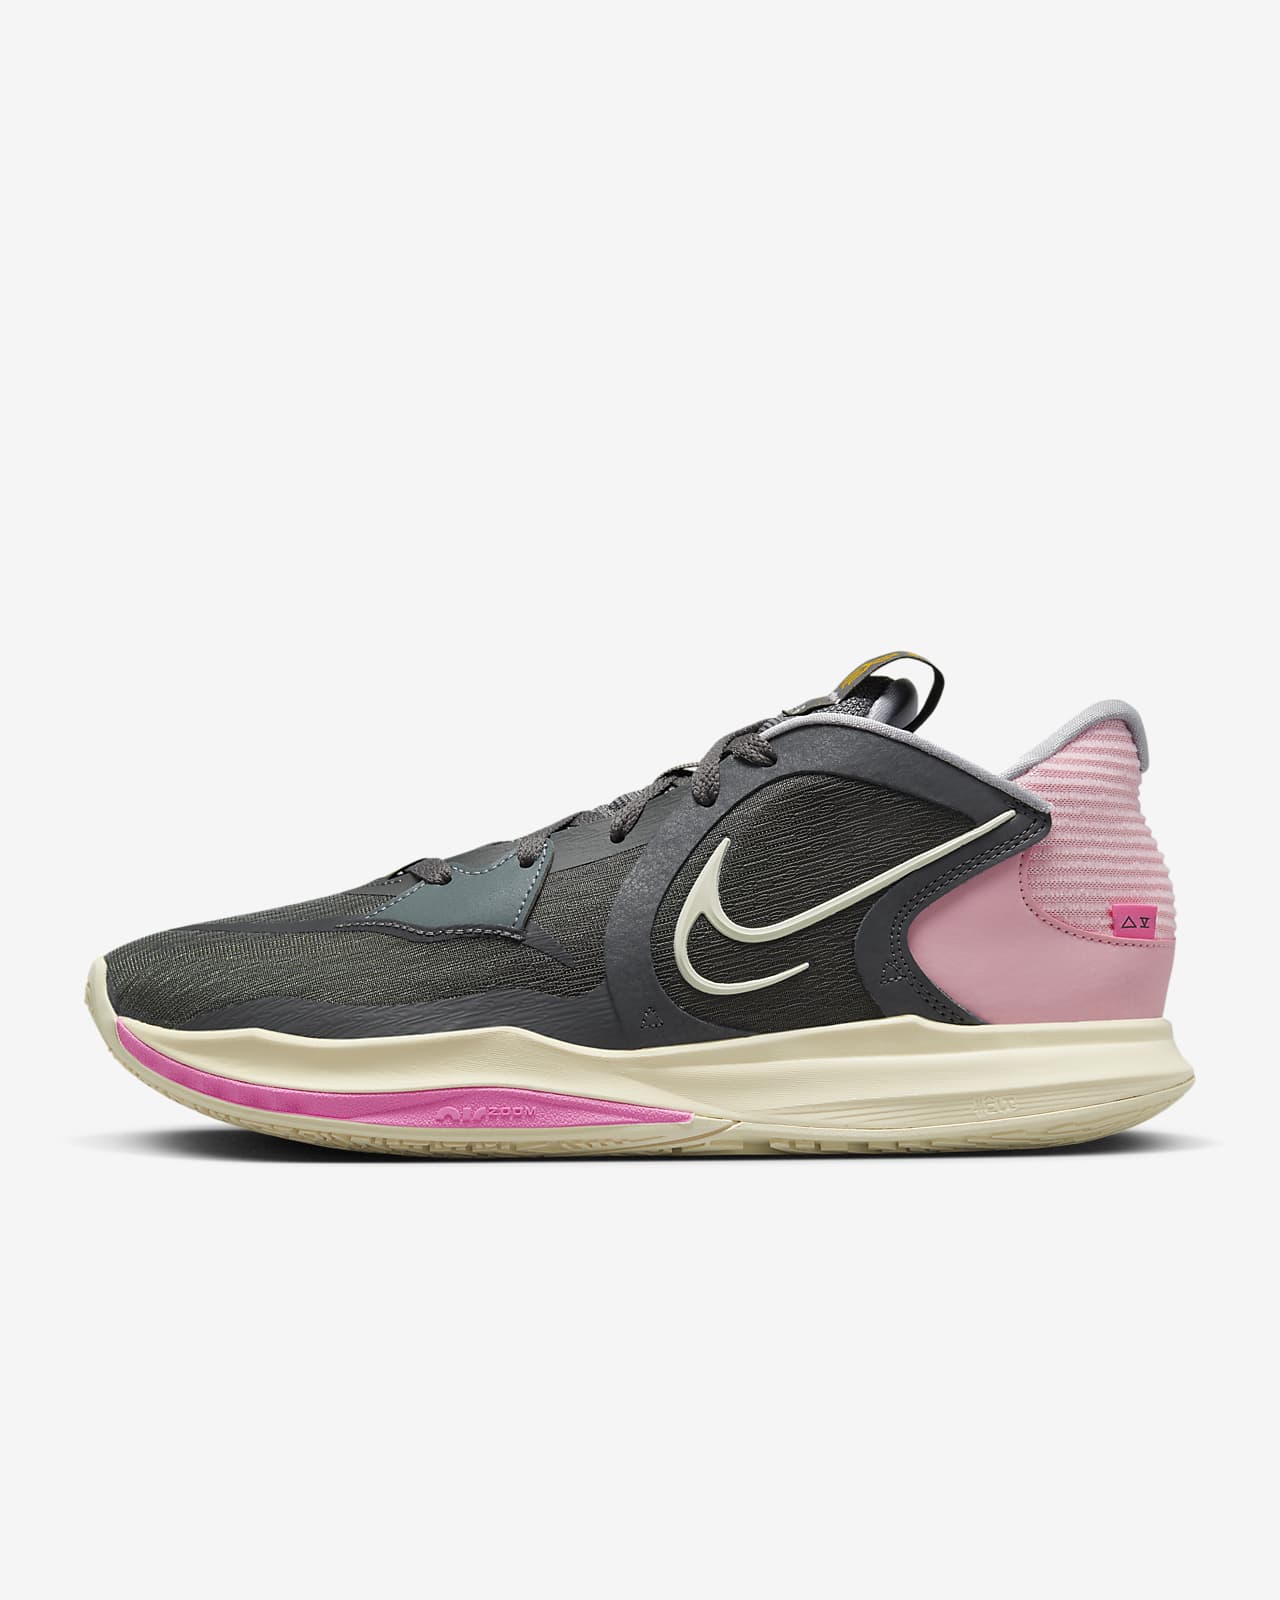 Nike Kyrie Low 5 Basketball Shoes in Pink for Men